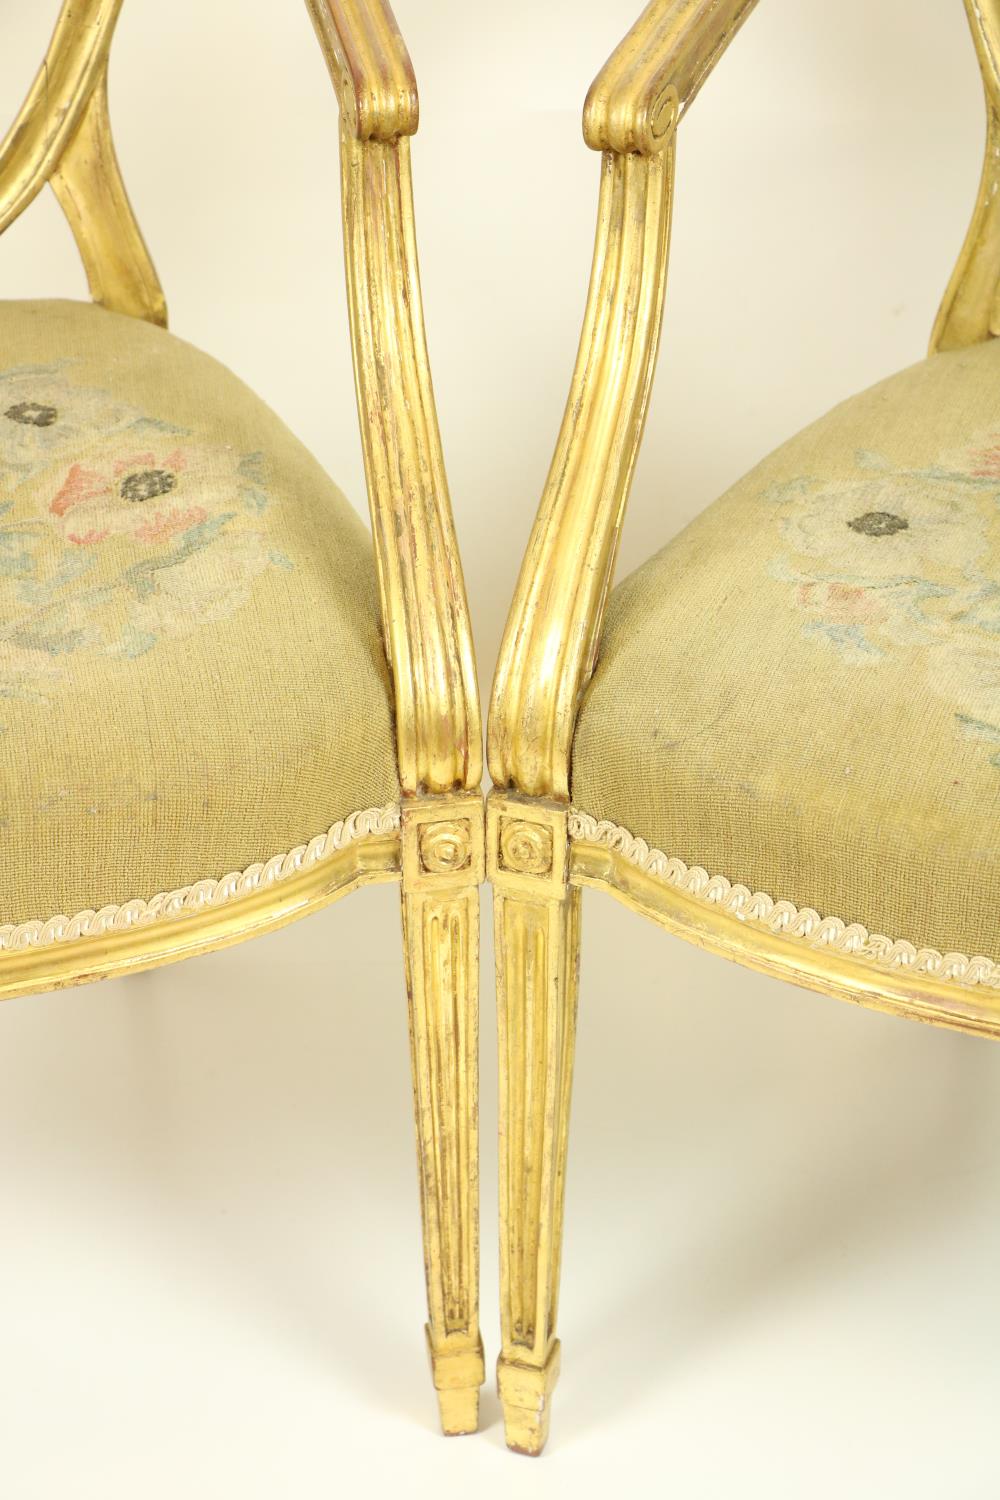 A fine set of four Regency gilt Open Armchairs, in the manner of James Wyatt (1746-1813), each - Image 6 of 7